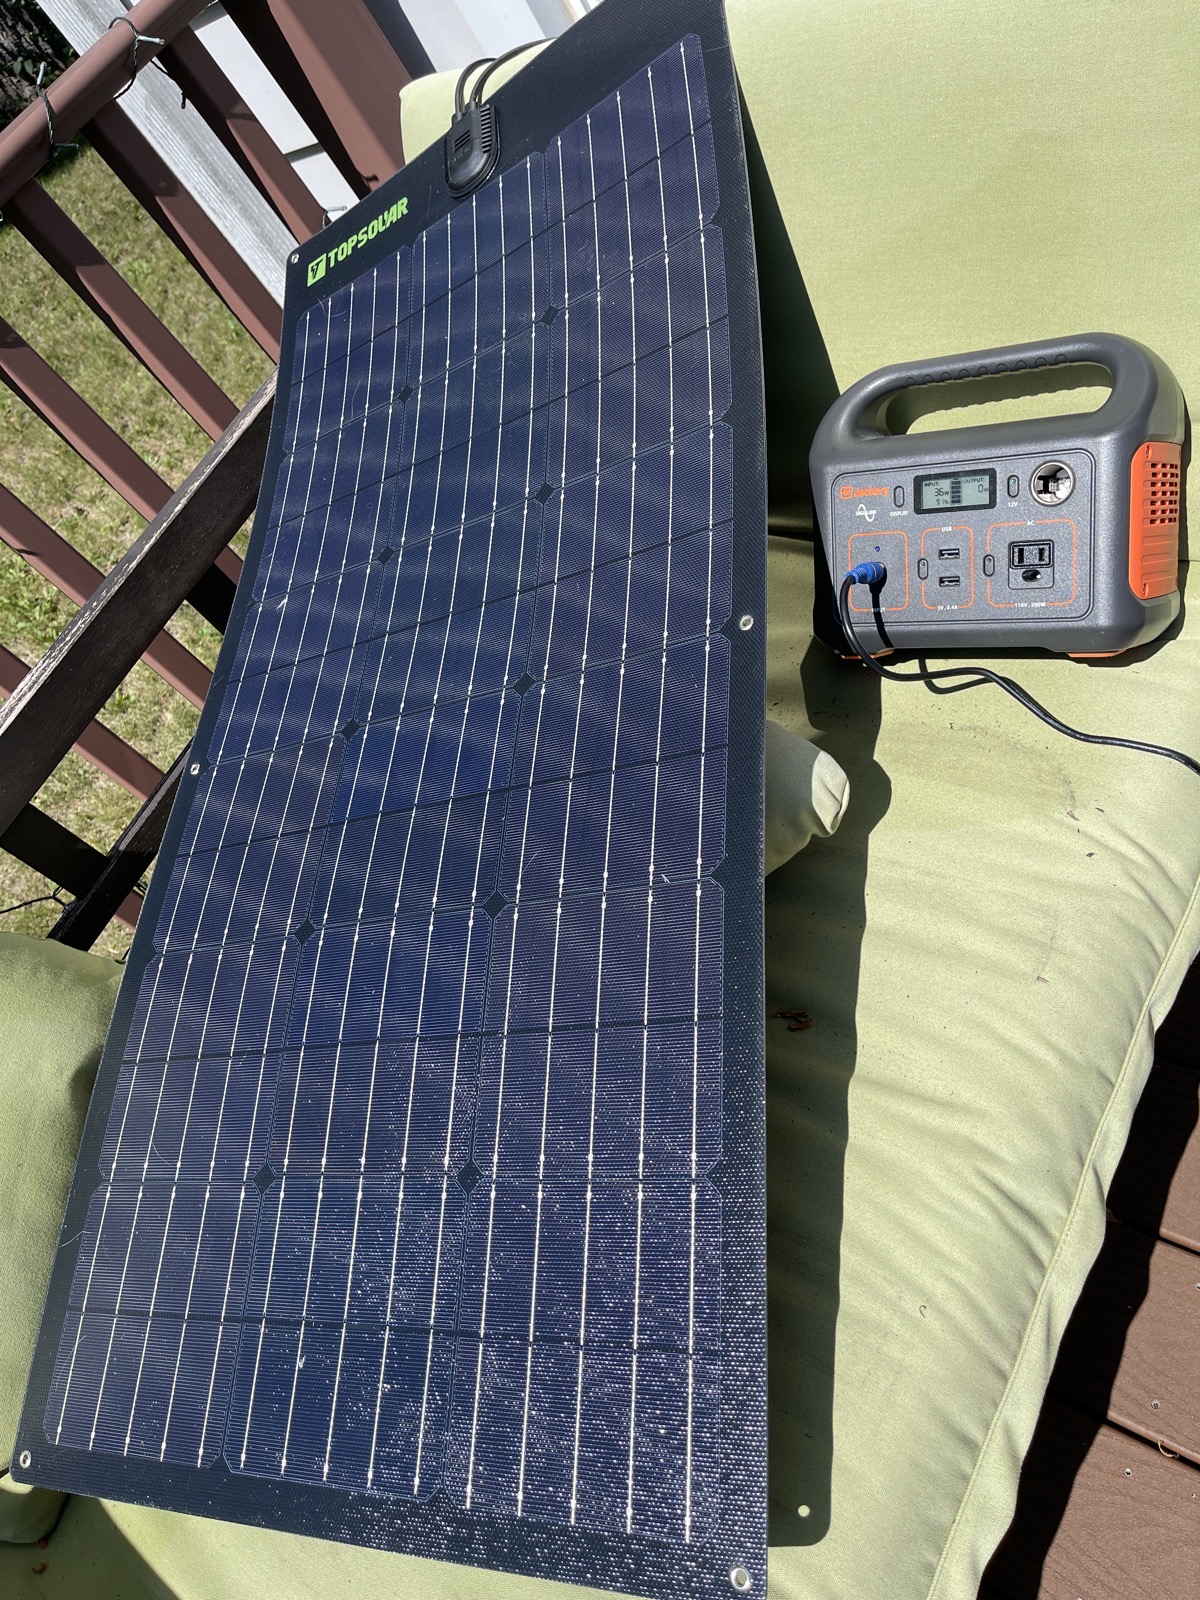 TopSolar panel laid out on a lawn chair charging the Jackery battery